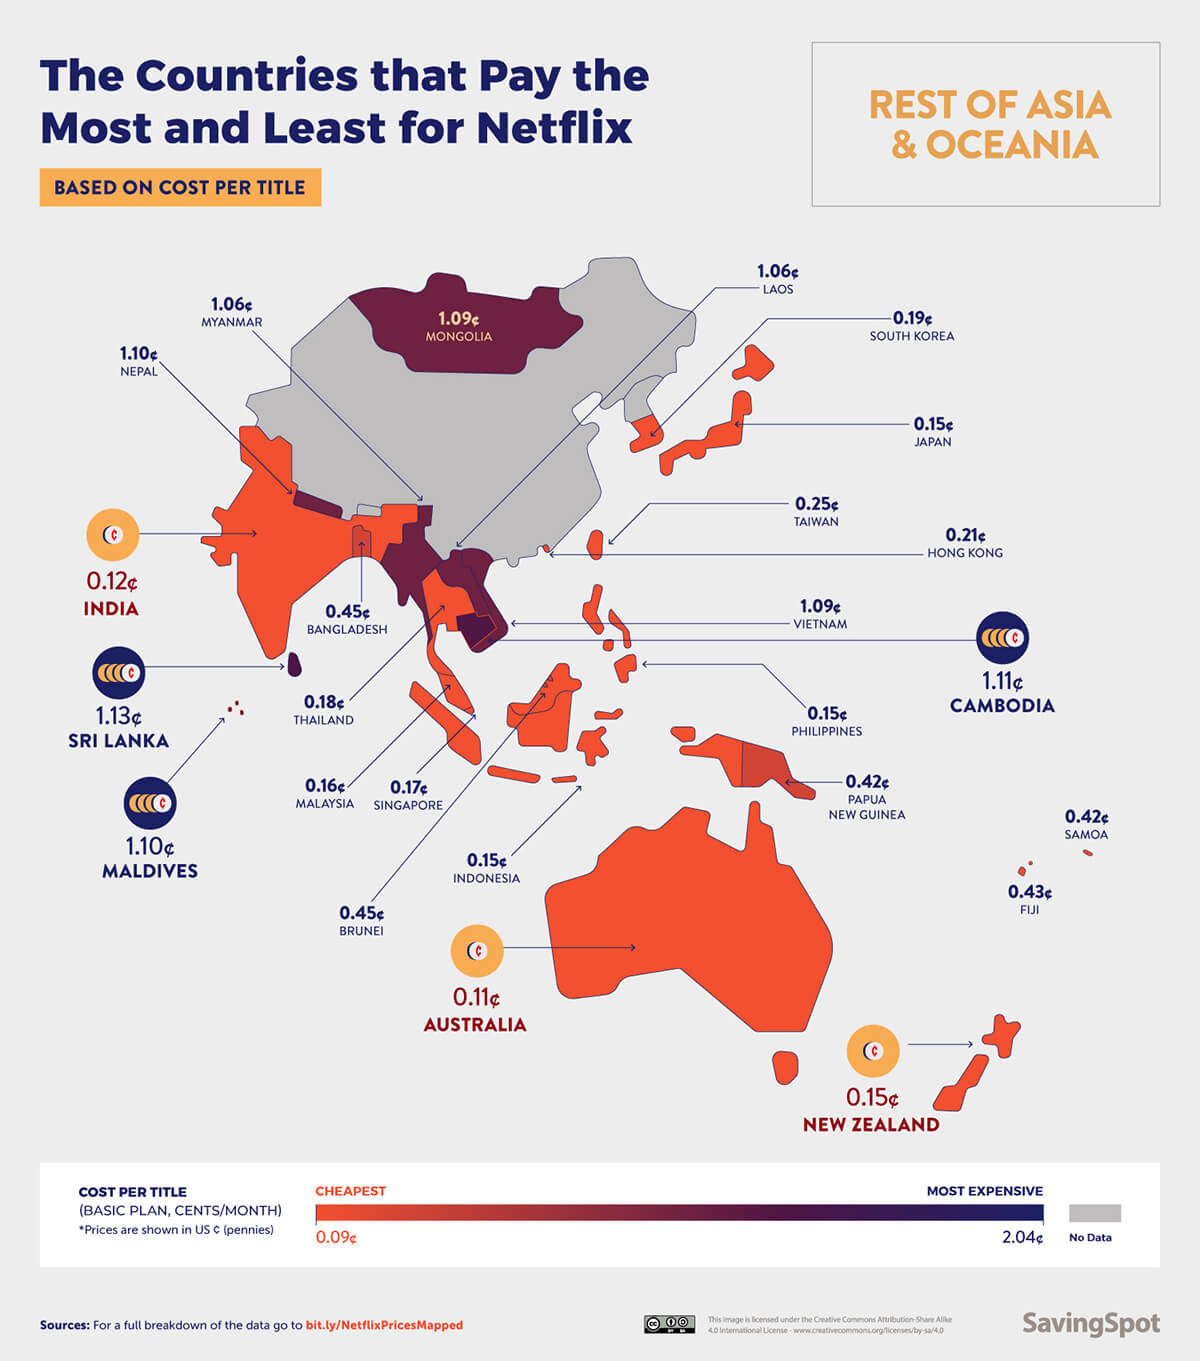 The Cost-per-title of Netflix in Rest of Asia & Oceania